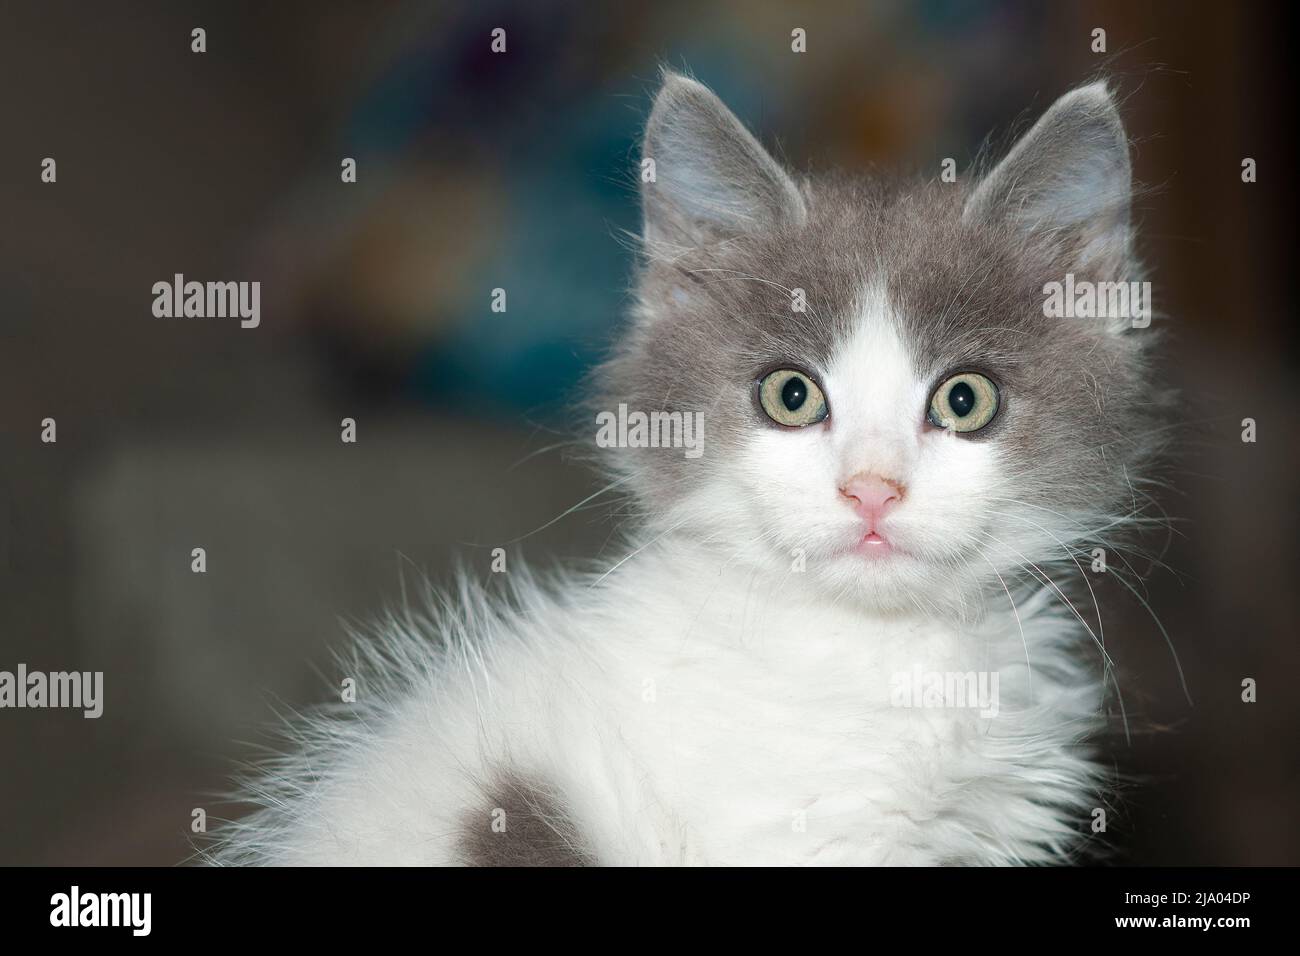 Cute little gray and white kitten looking into camera Stock Photo